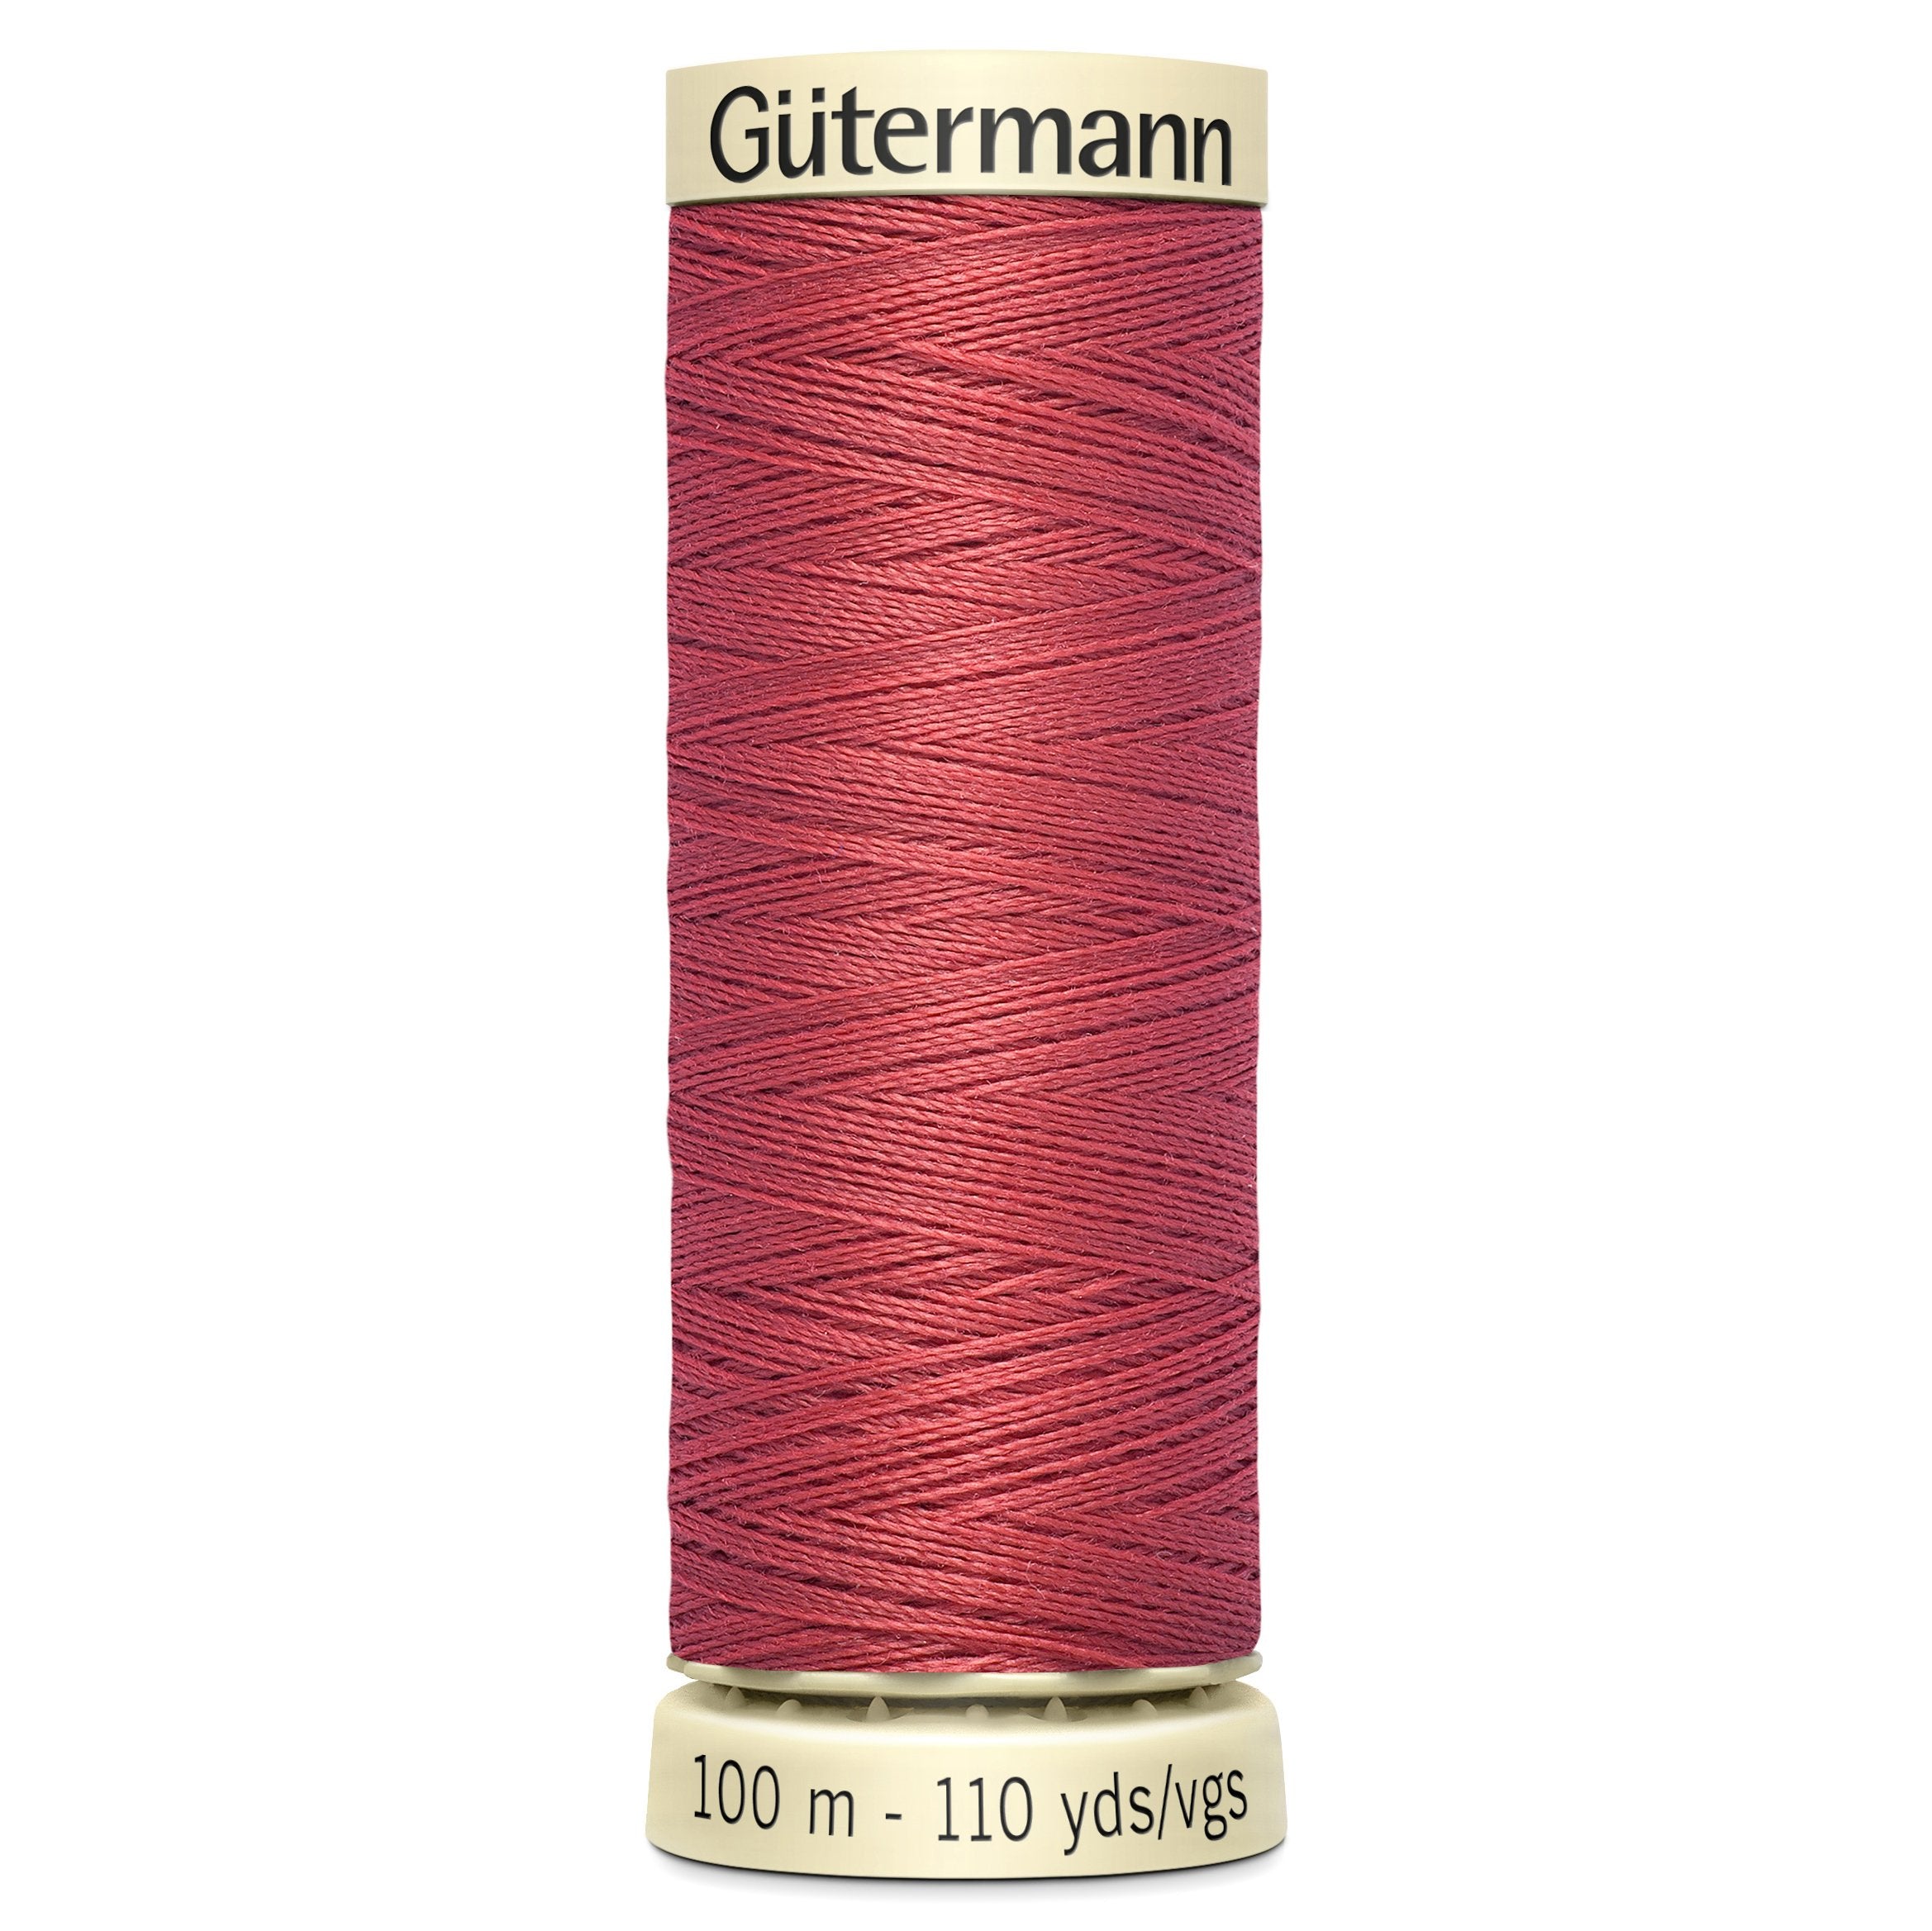 Gutermann Sew All Thread colour 519 Rosé Wine from Jaycotts Sewing Supplies